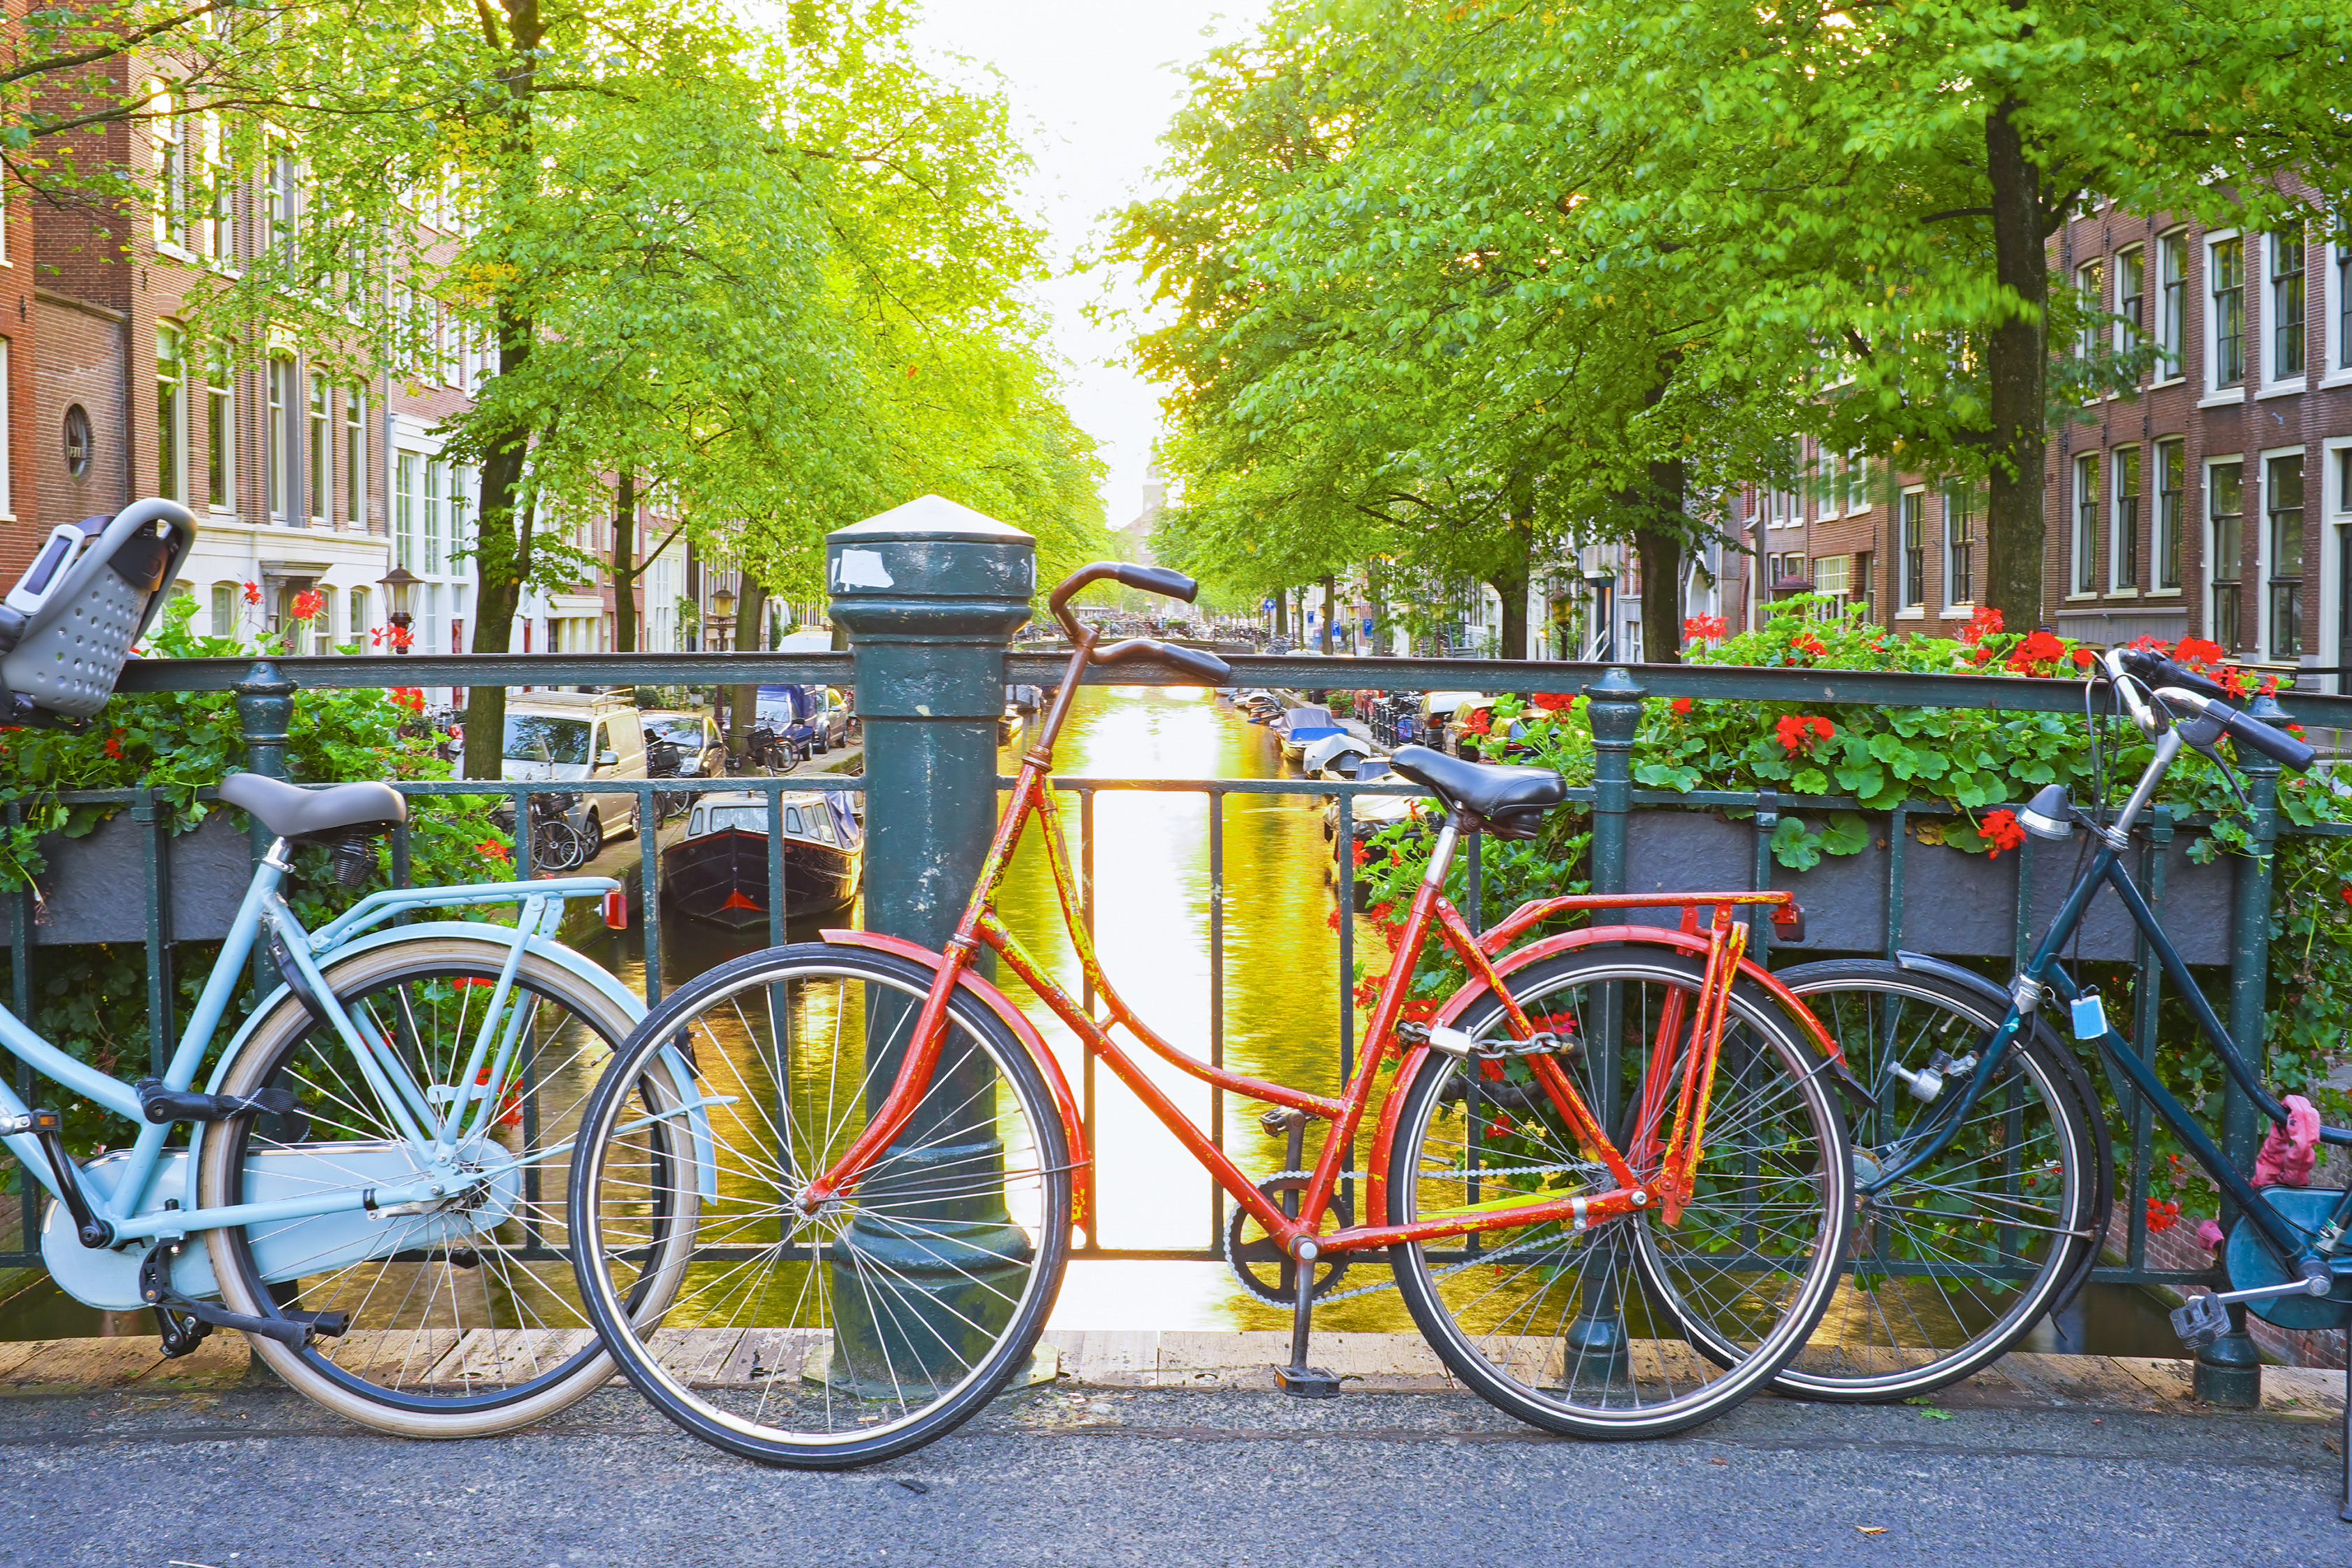 Study abroad in the Netherlands to learn about Dutch culture and their progressive approach to LGBTQ+ rights, women and gender studies, and sex education. Bikes along the canals in Amsterdam